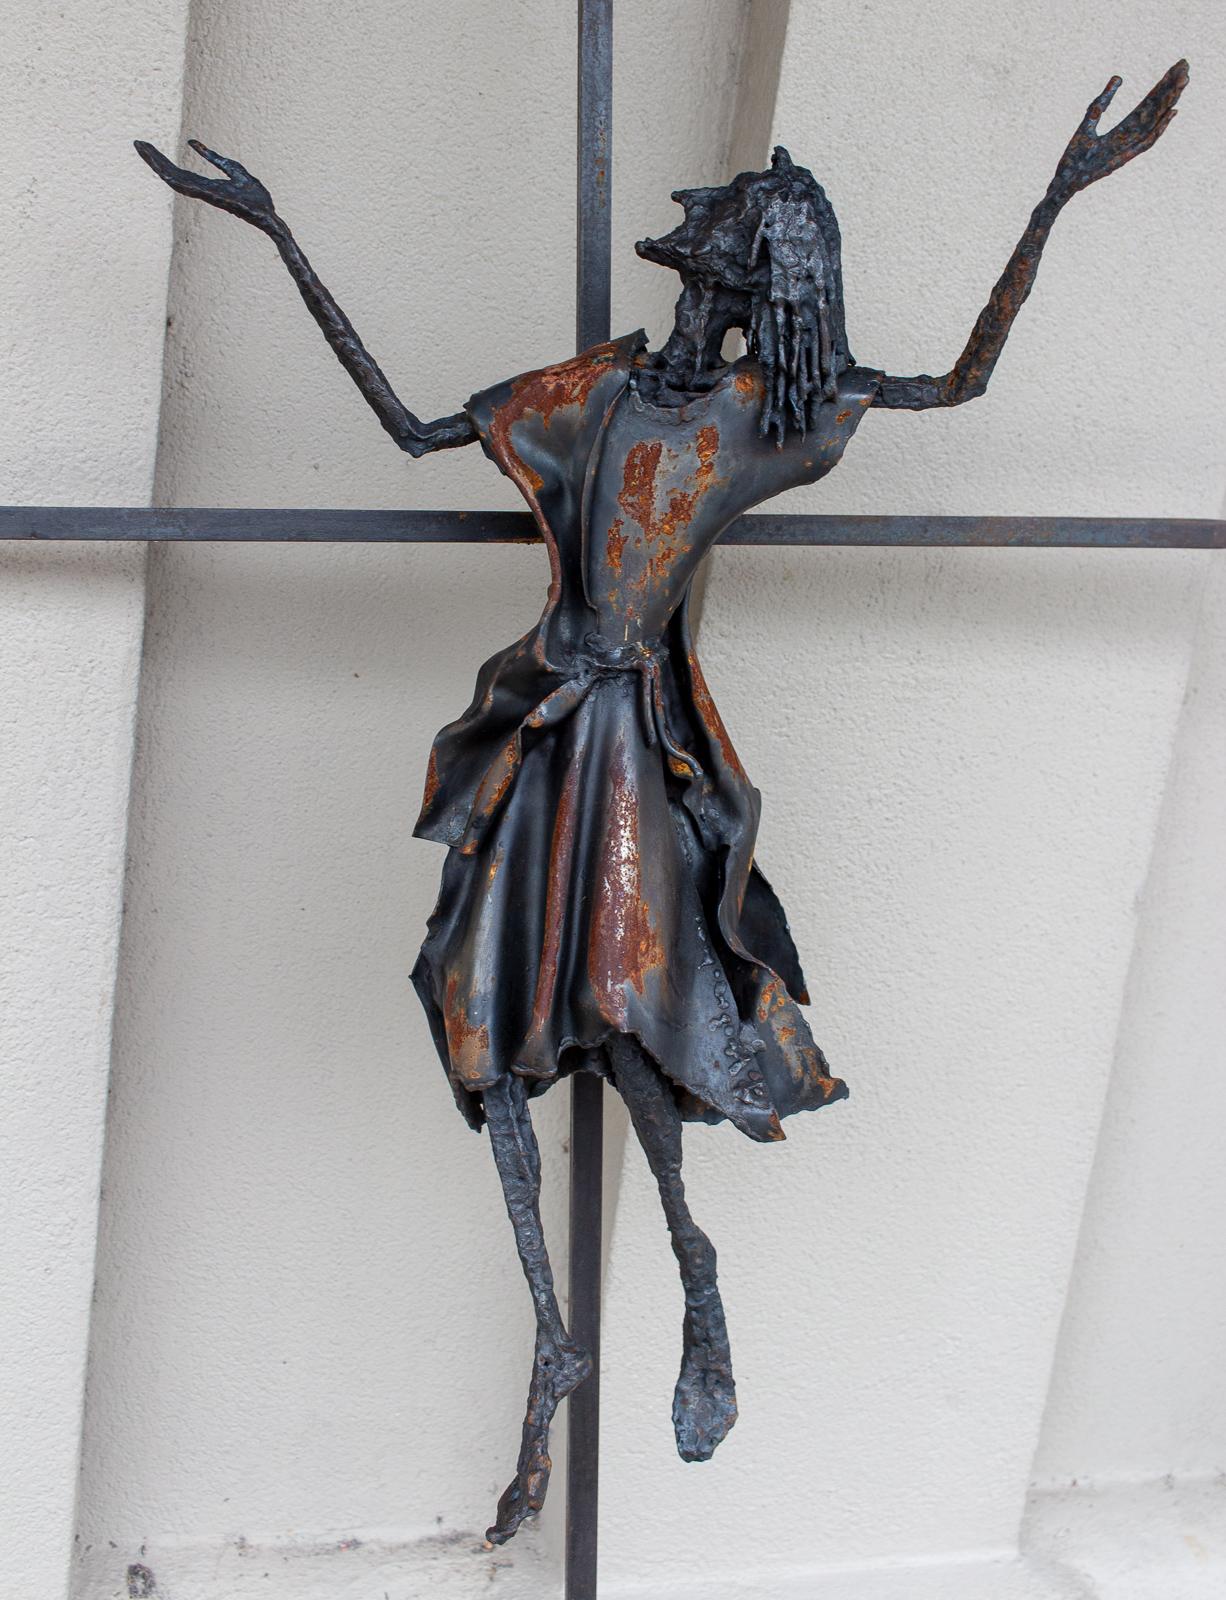 This hand forged iron crucifix features an image of Christ that leaves the viewer with a feeling of hopefulness. Eyes to the heavens, and arms raised, this iron sculpture seems to almost float. The artist is unknown, but this piece was sourced in